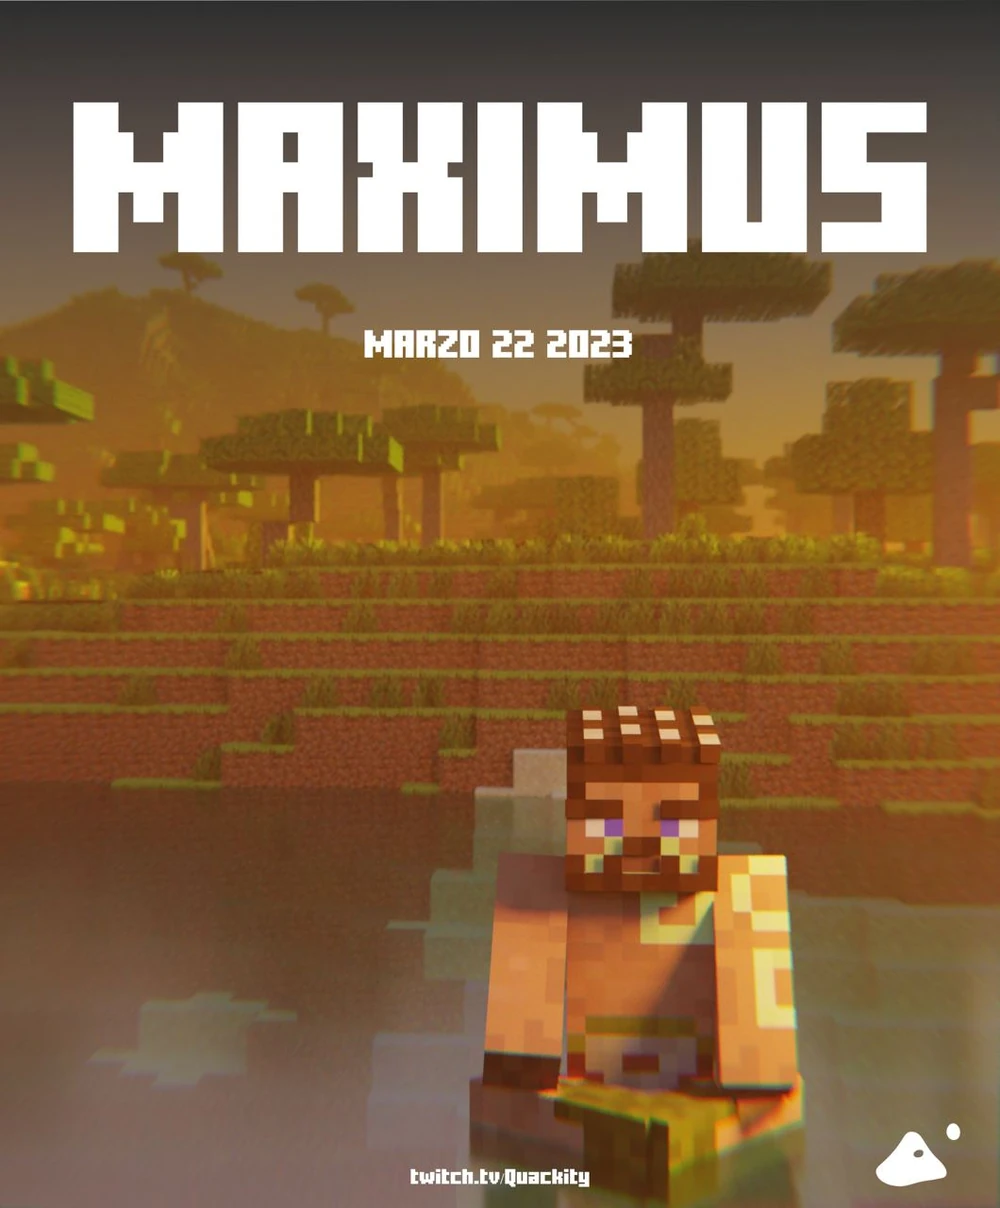 Official announcement poster for Maximus. He is sat alone in a lake with his legs crossed, like he's meditating. However, his skin is not the correct skin. It looks like it's from a different series entirely, a caveman with bushy brown hair and white paint on his face and chest. He wears green grass skirt and sandals.